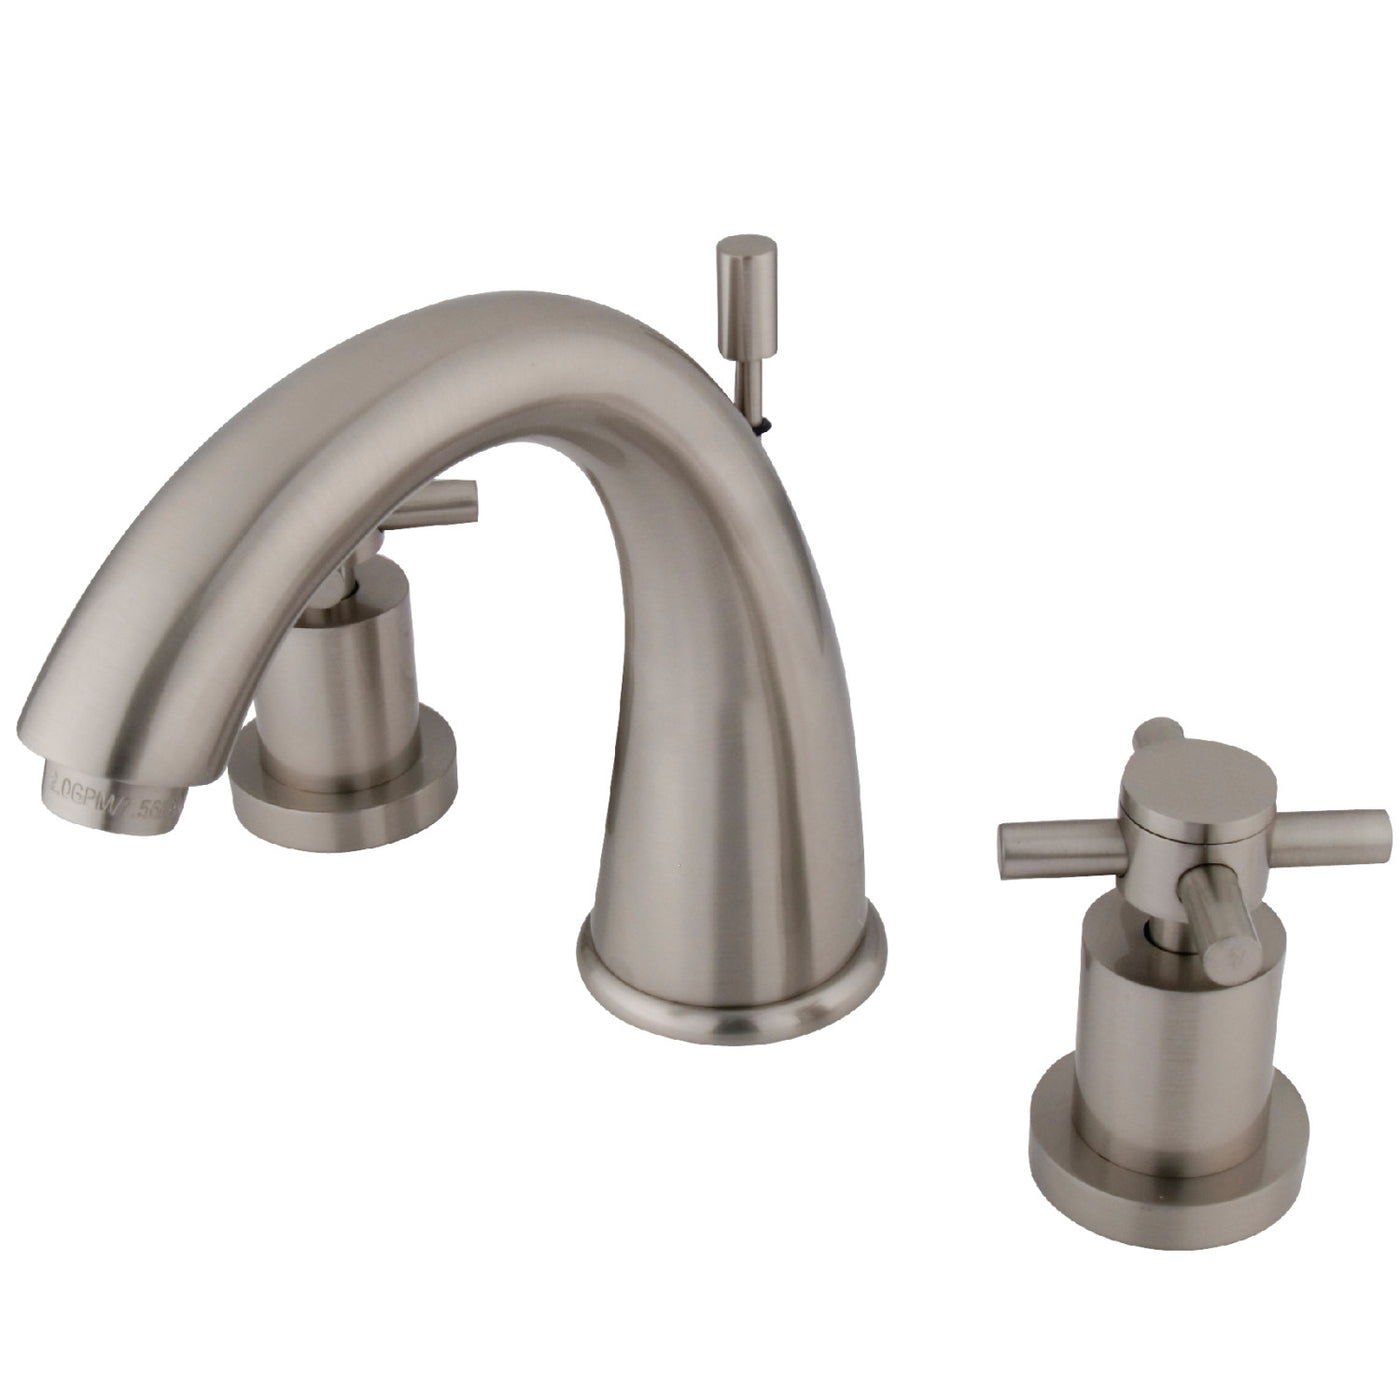 Elements of Design ES2968DX Widespread Bathroom Faucet with Brass Pop-Up, Brushed Nickel